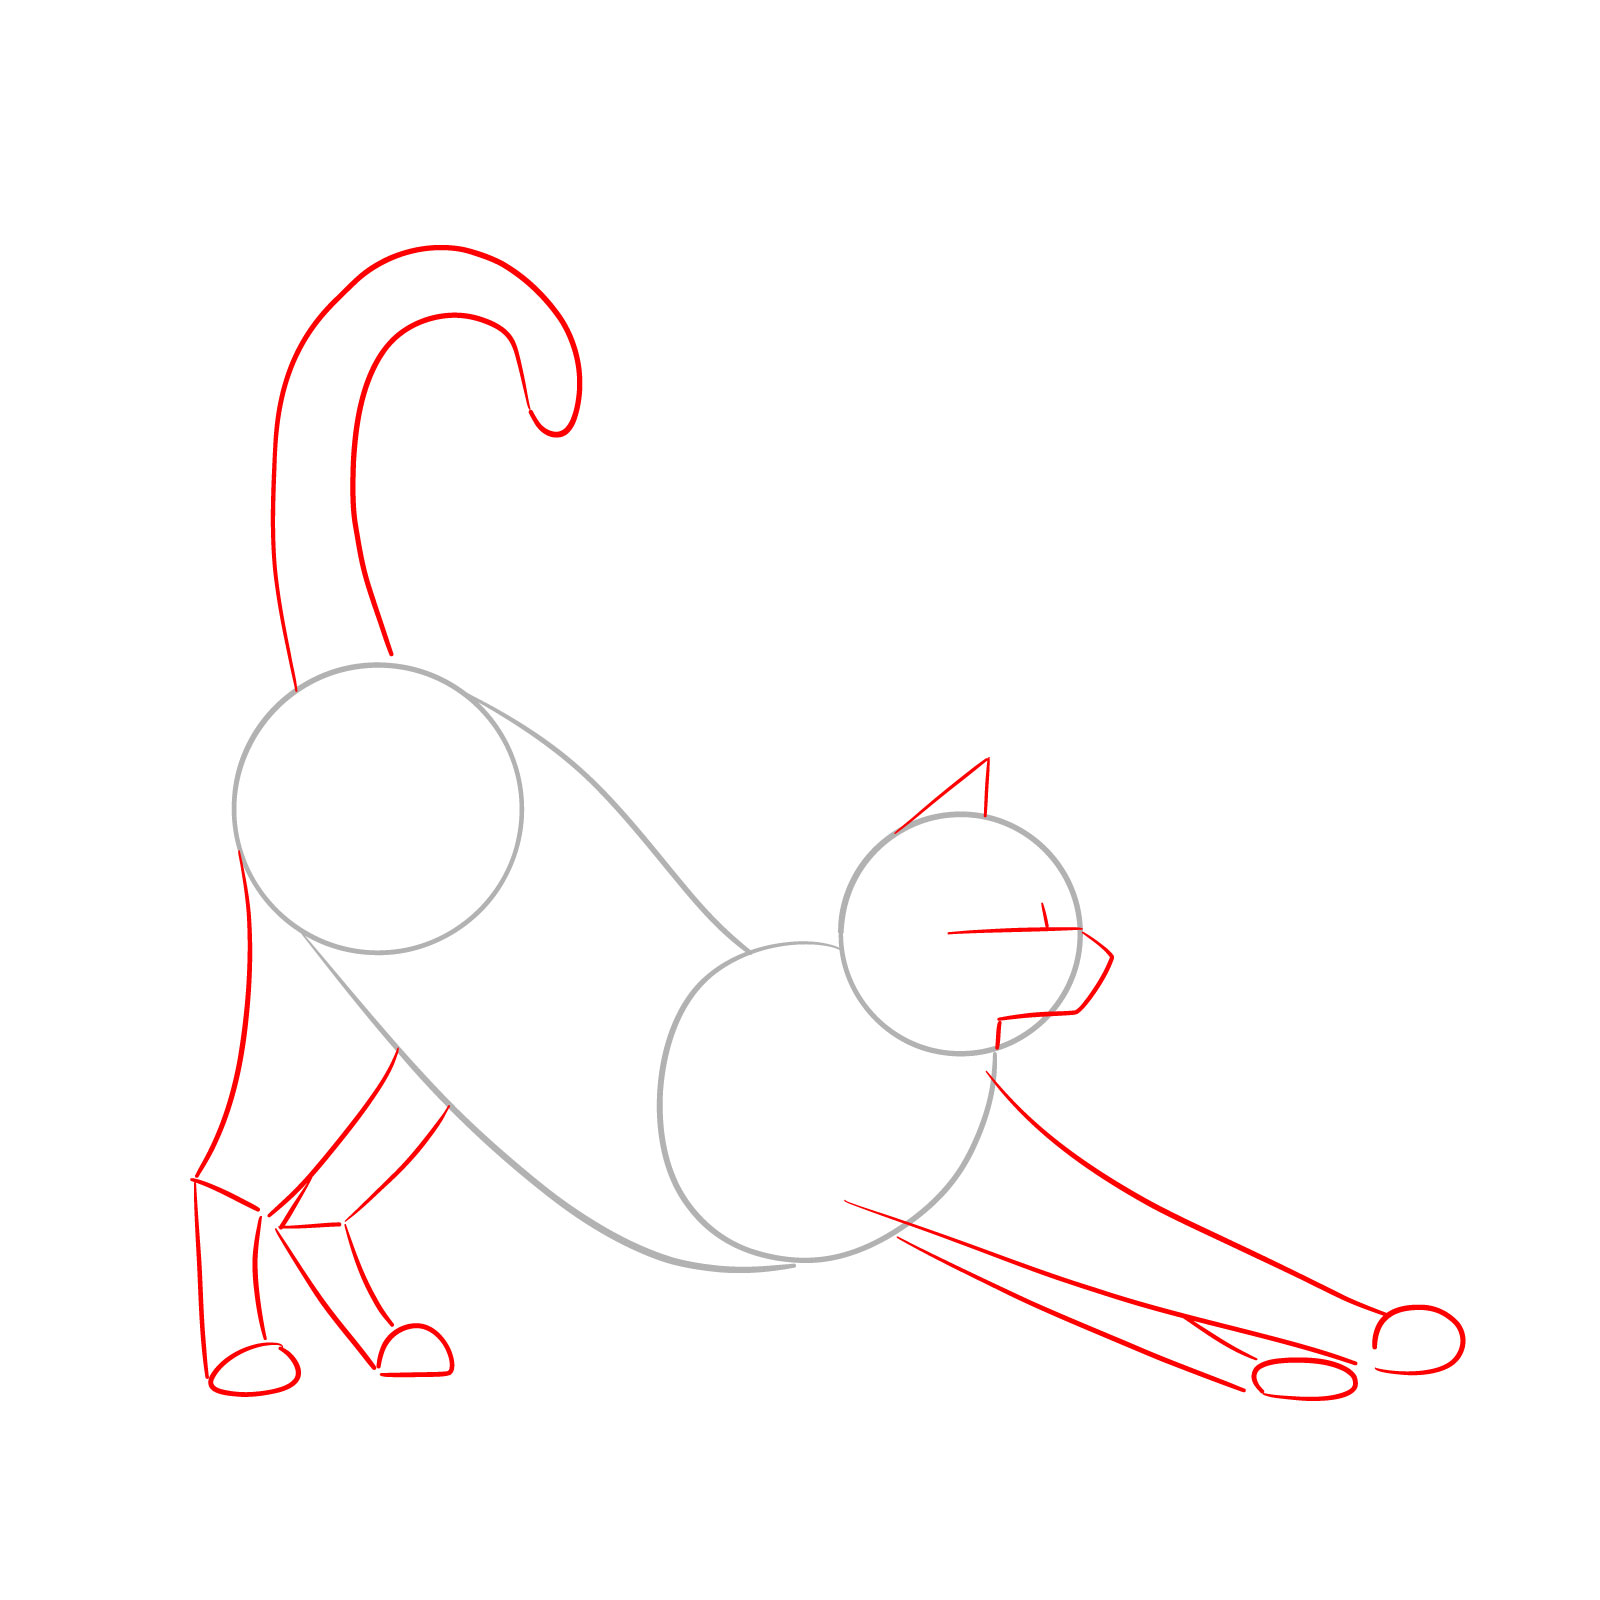 Sketch of a cat in side view with basic shapes for the head, body, legs, paws, and tail - step 02